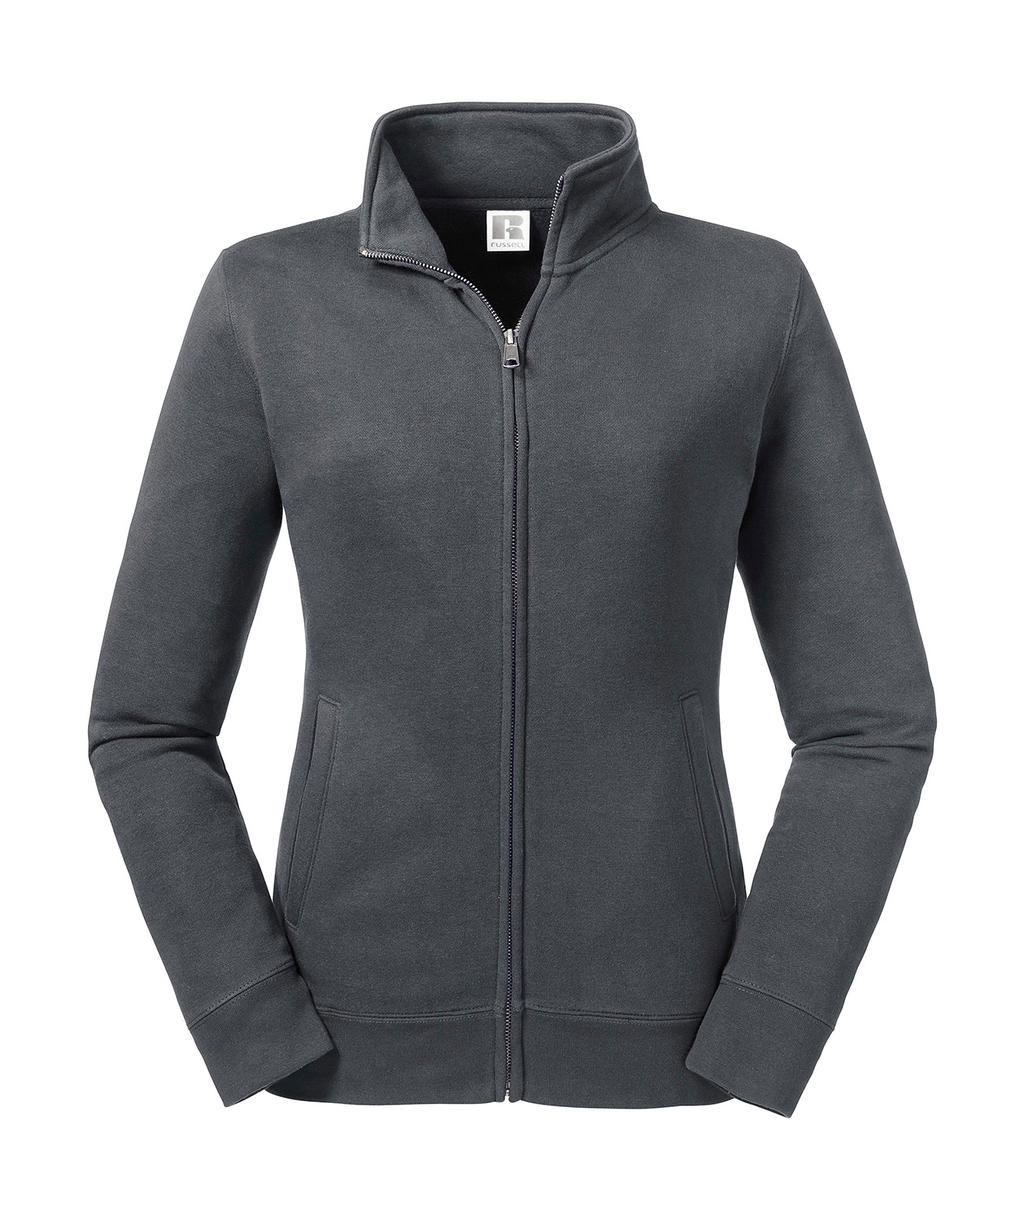  Ladies Authentic Sweat Jacket in Farbe Convoy Grey